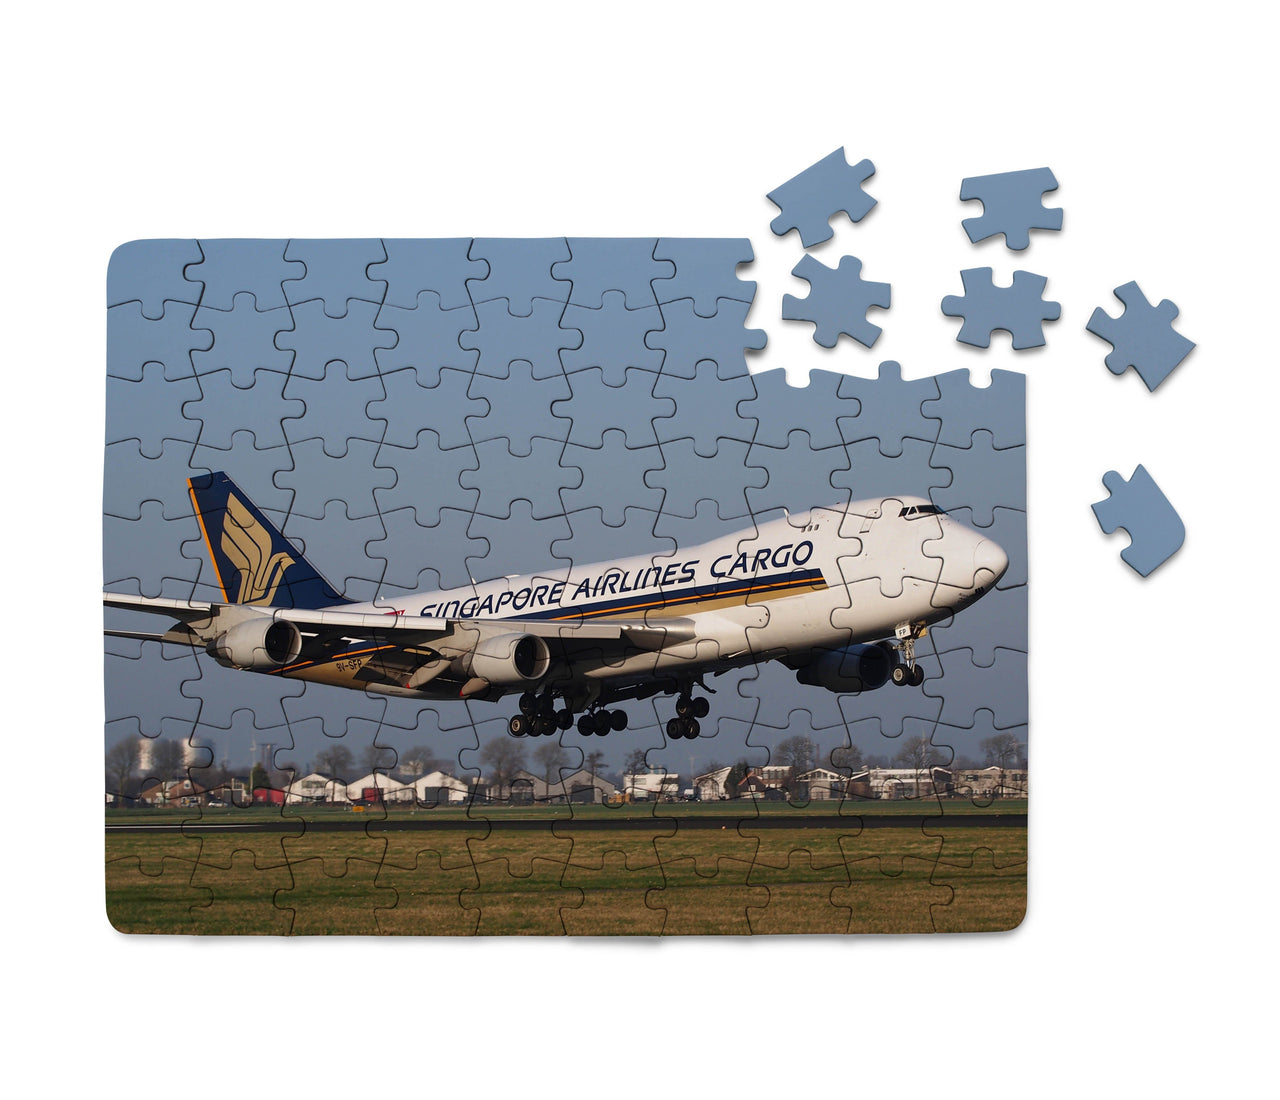 Singapore Airlines Cargo Boeing 747 Printed Puzzles Aviation Shop 